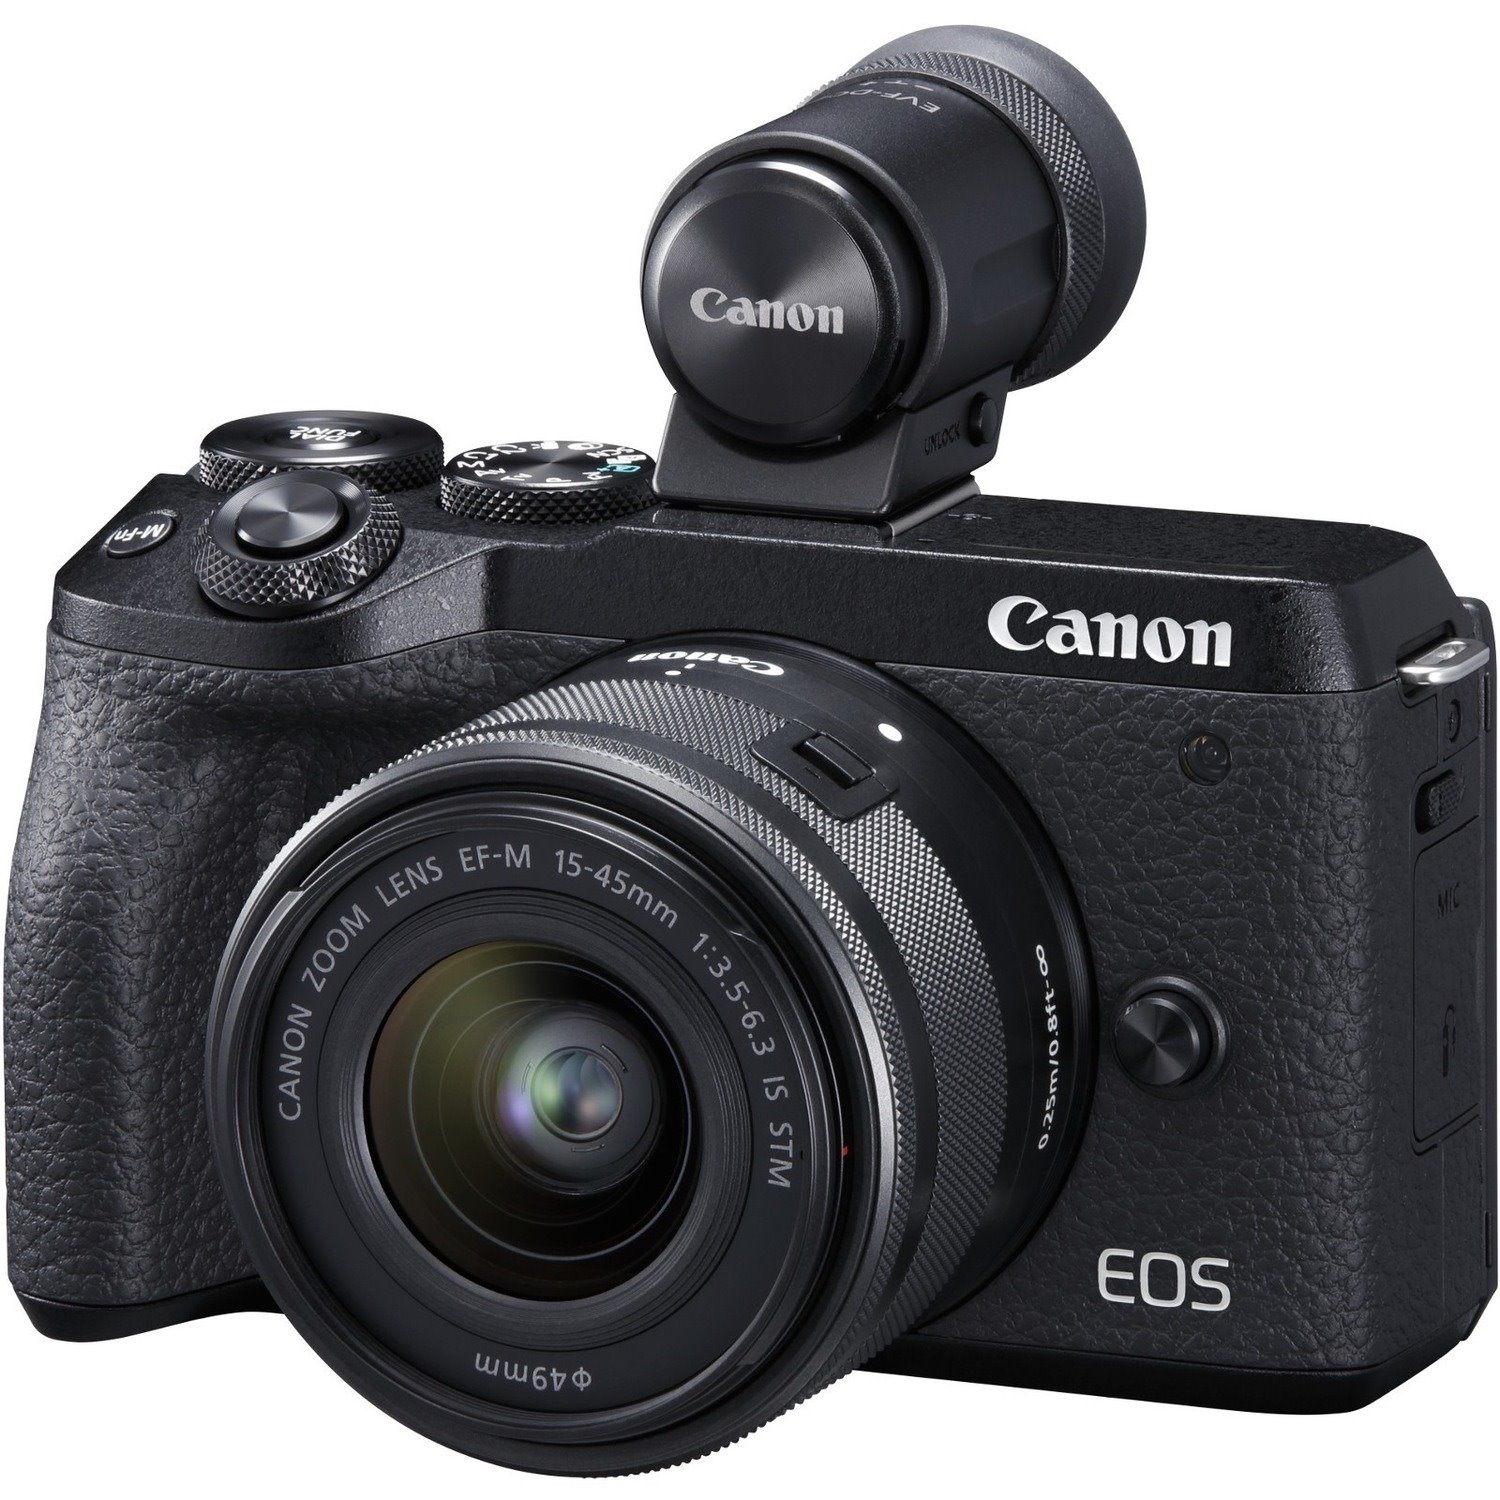 Canon EOS M6 Mark II 32.5 Megapixel Mirrorless Camera with Lens - 15 mm - 45 mm - Black